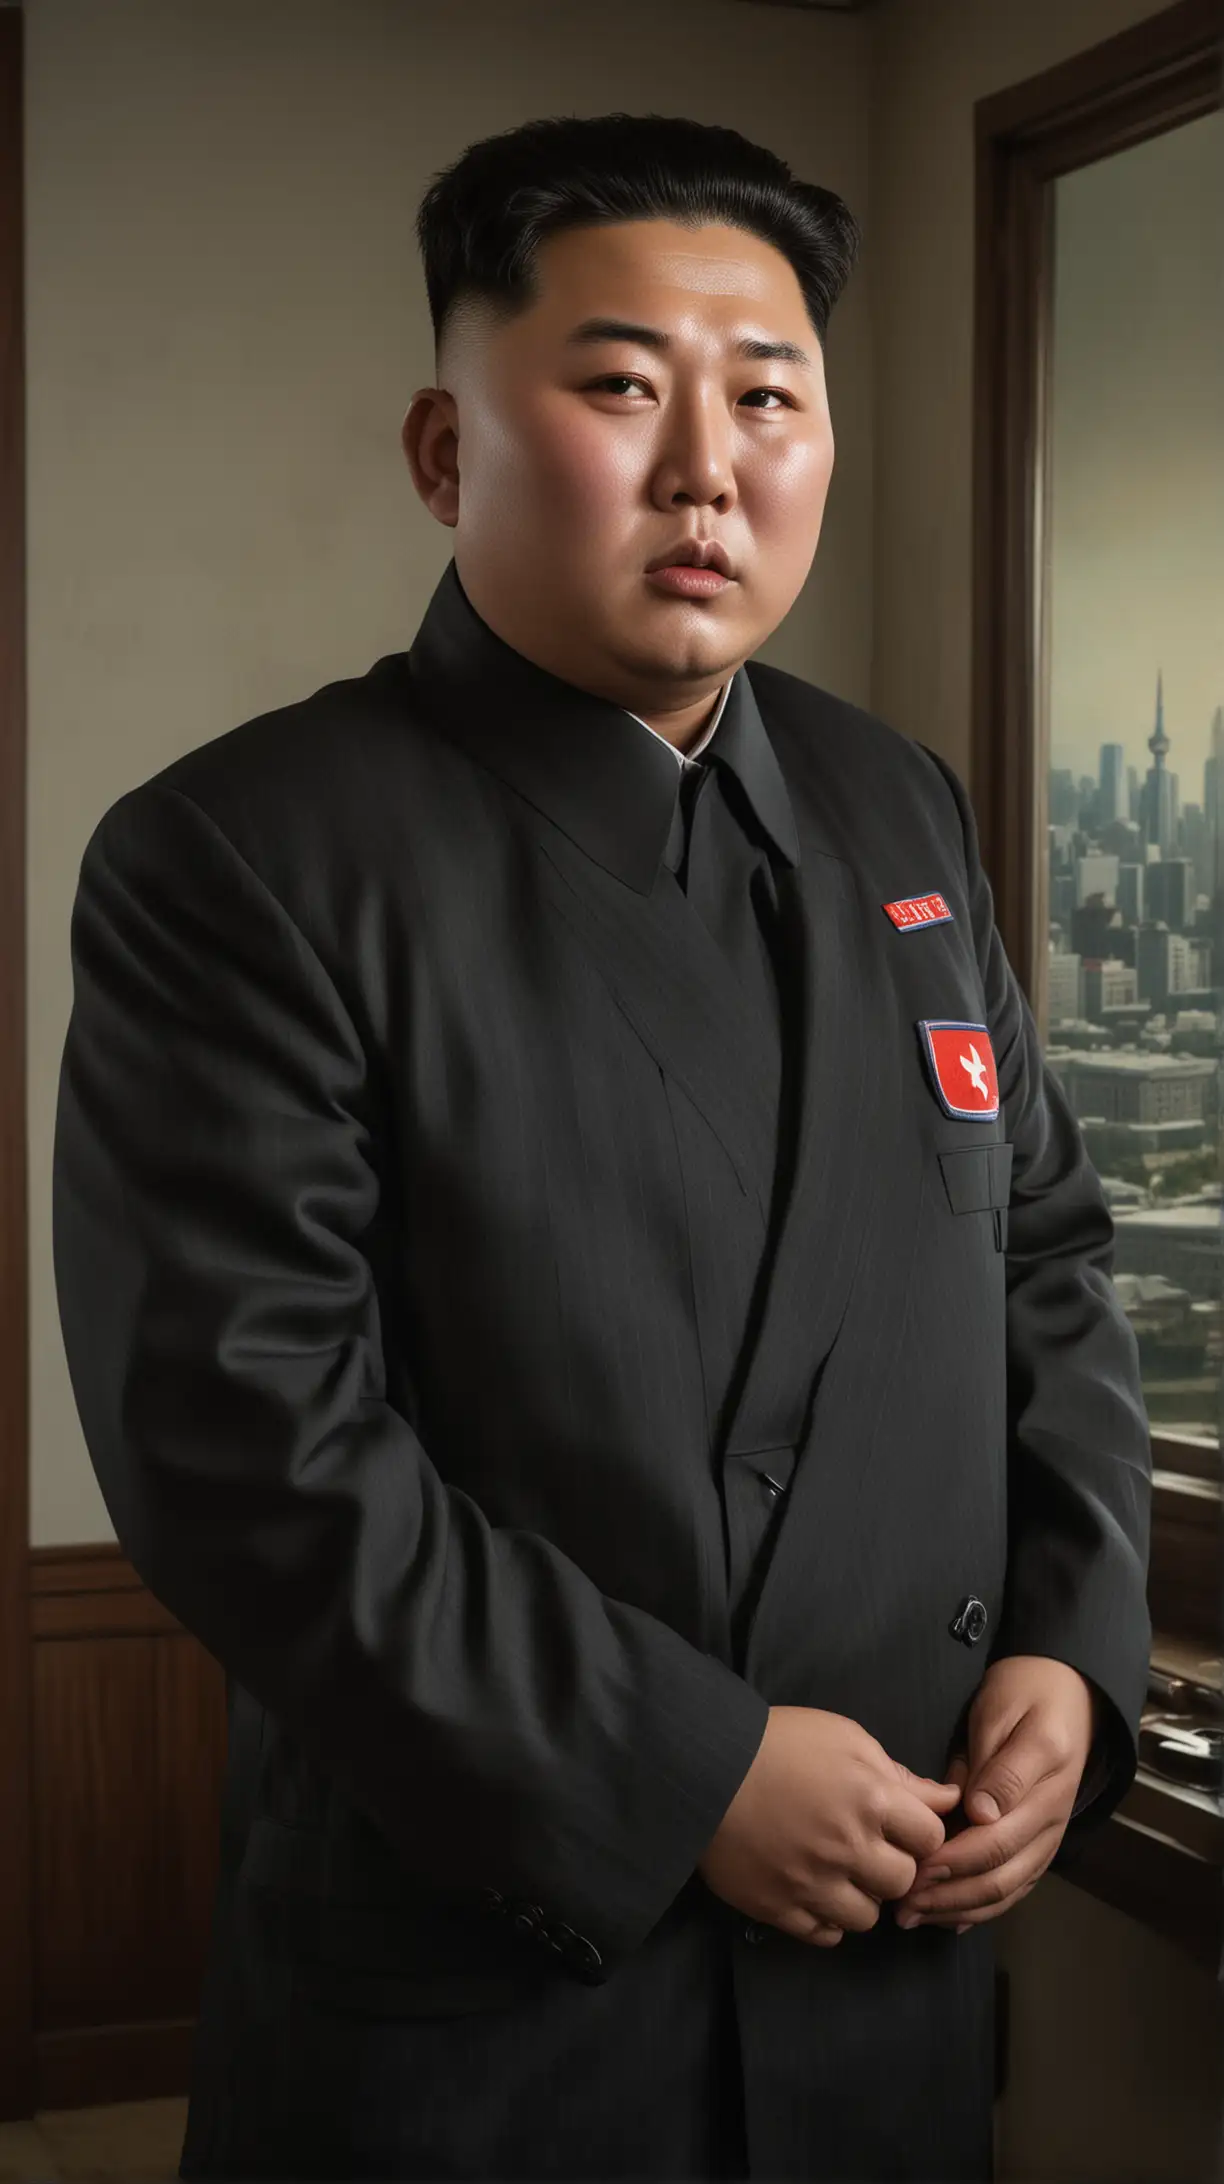 Description: Create a detailed portrait of Kim Jong Un dressed in a black suit or traditional North Korean attire. Pay close attention to his facial features, emphasizing his round face, distinctive hairstyle, and serious expression. Capture the essence of his leadership and authority through subtle details like the emblem of the Workers' Party of Korea pinned to his chest. Set the scene against a background that conveys a sense of formality and power, such as a state room with North Korean flags or a subtle view of Pyongyang cityscape through a window. Ensure the lighting enhances the seriousness and dignity of his demeanor while portraying a respectful representation of the Supreme Leader of North Korea.